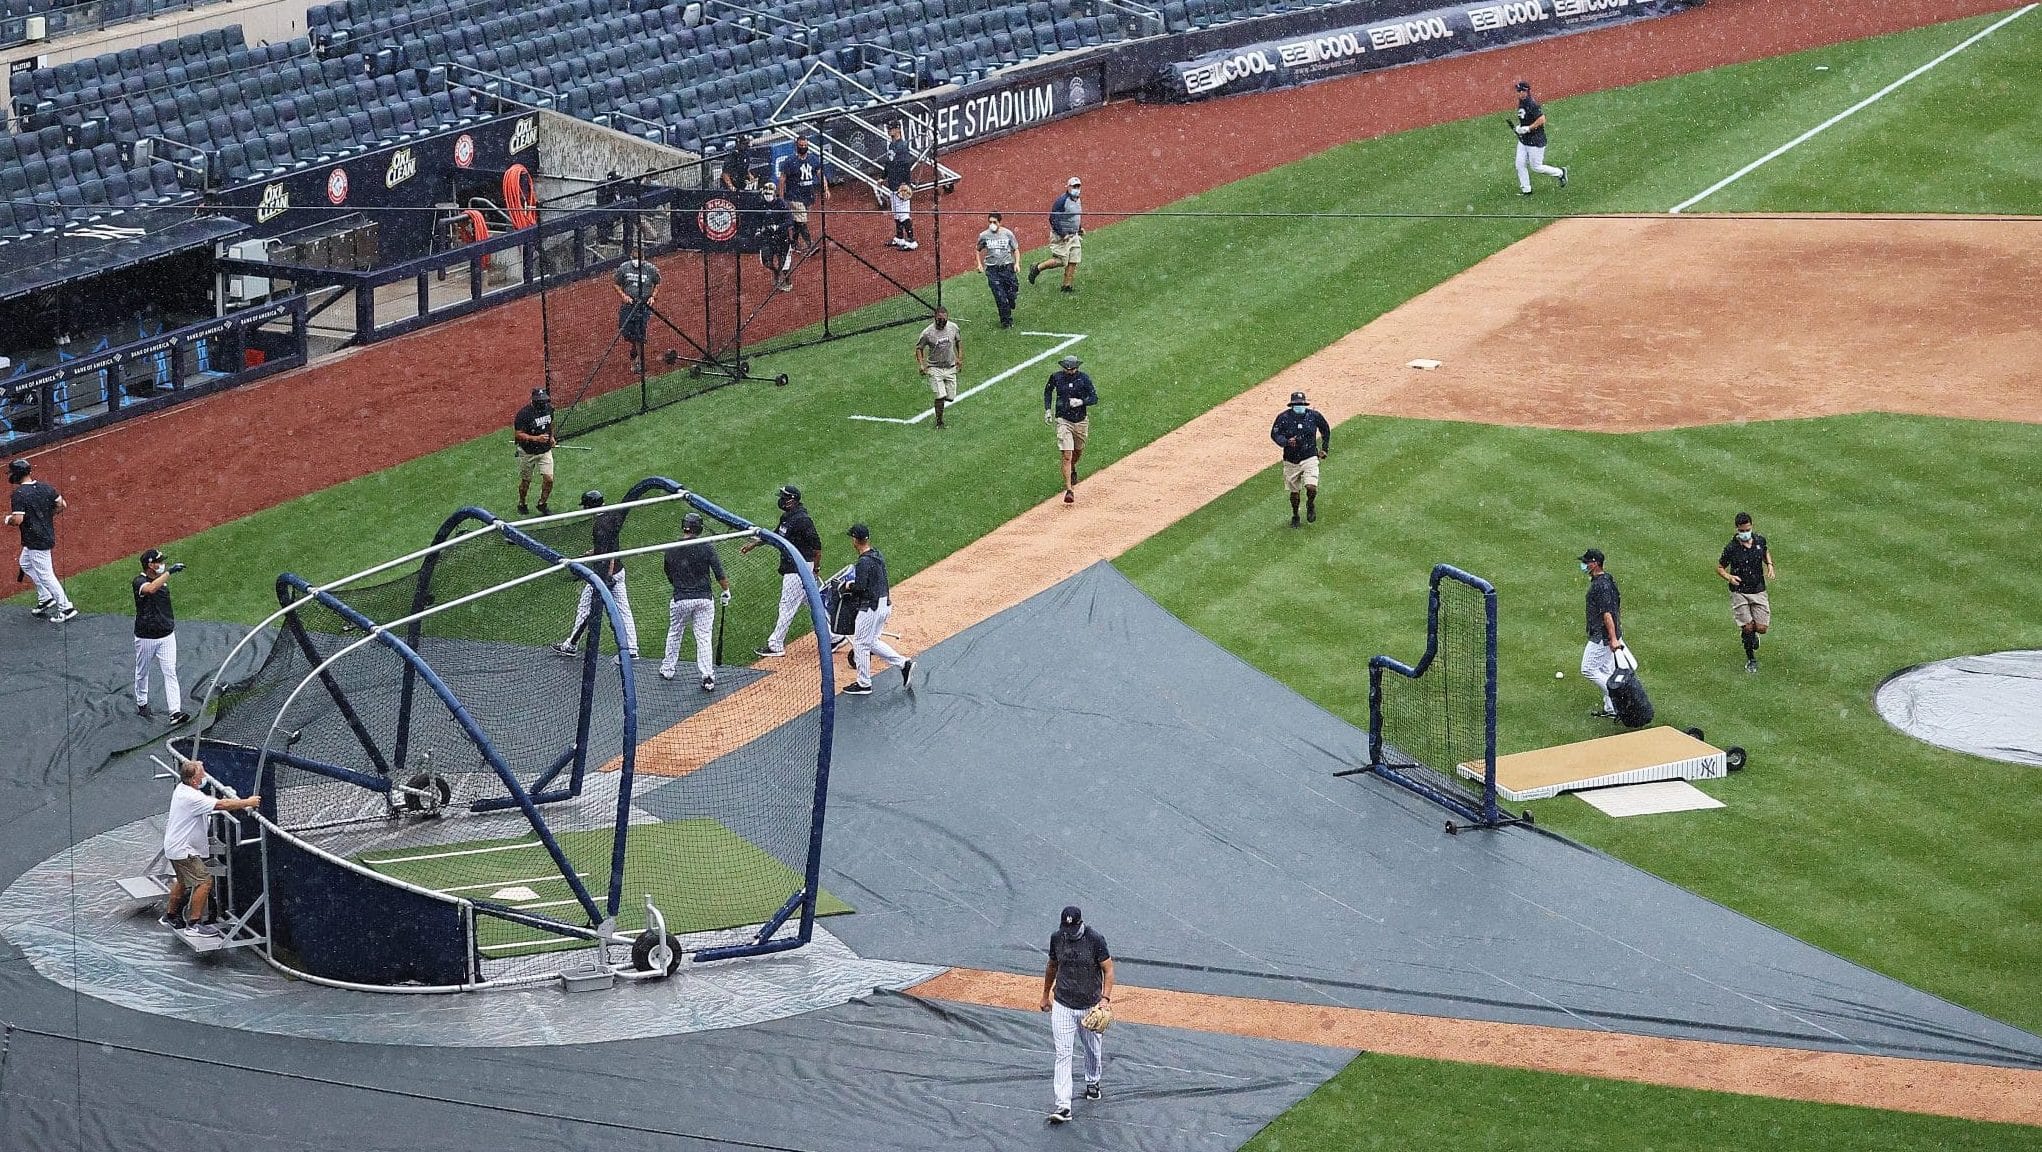 NEW YORK, NEW YORK - JULY 08: Practice is halted due to rain during New York Yankees summer workouts at Yankee Stadium on July 08, 2020 in the Bronx borough of New York City.